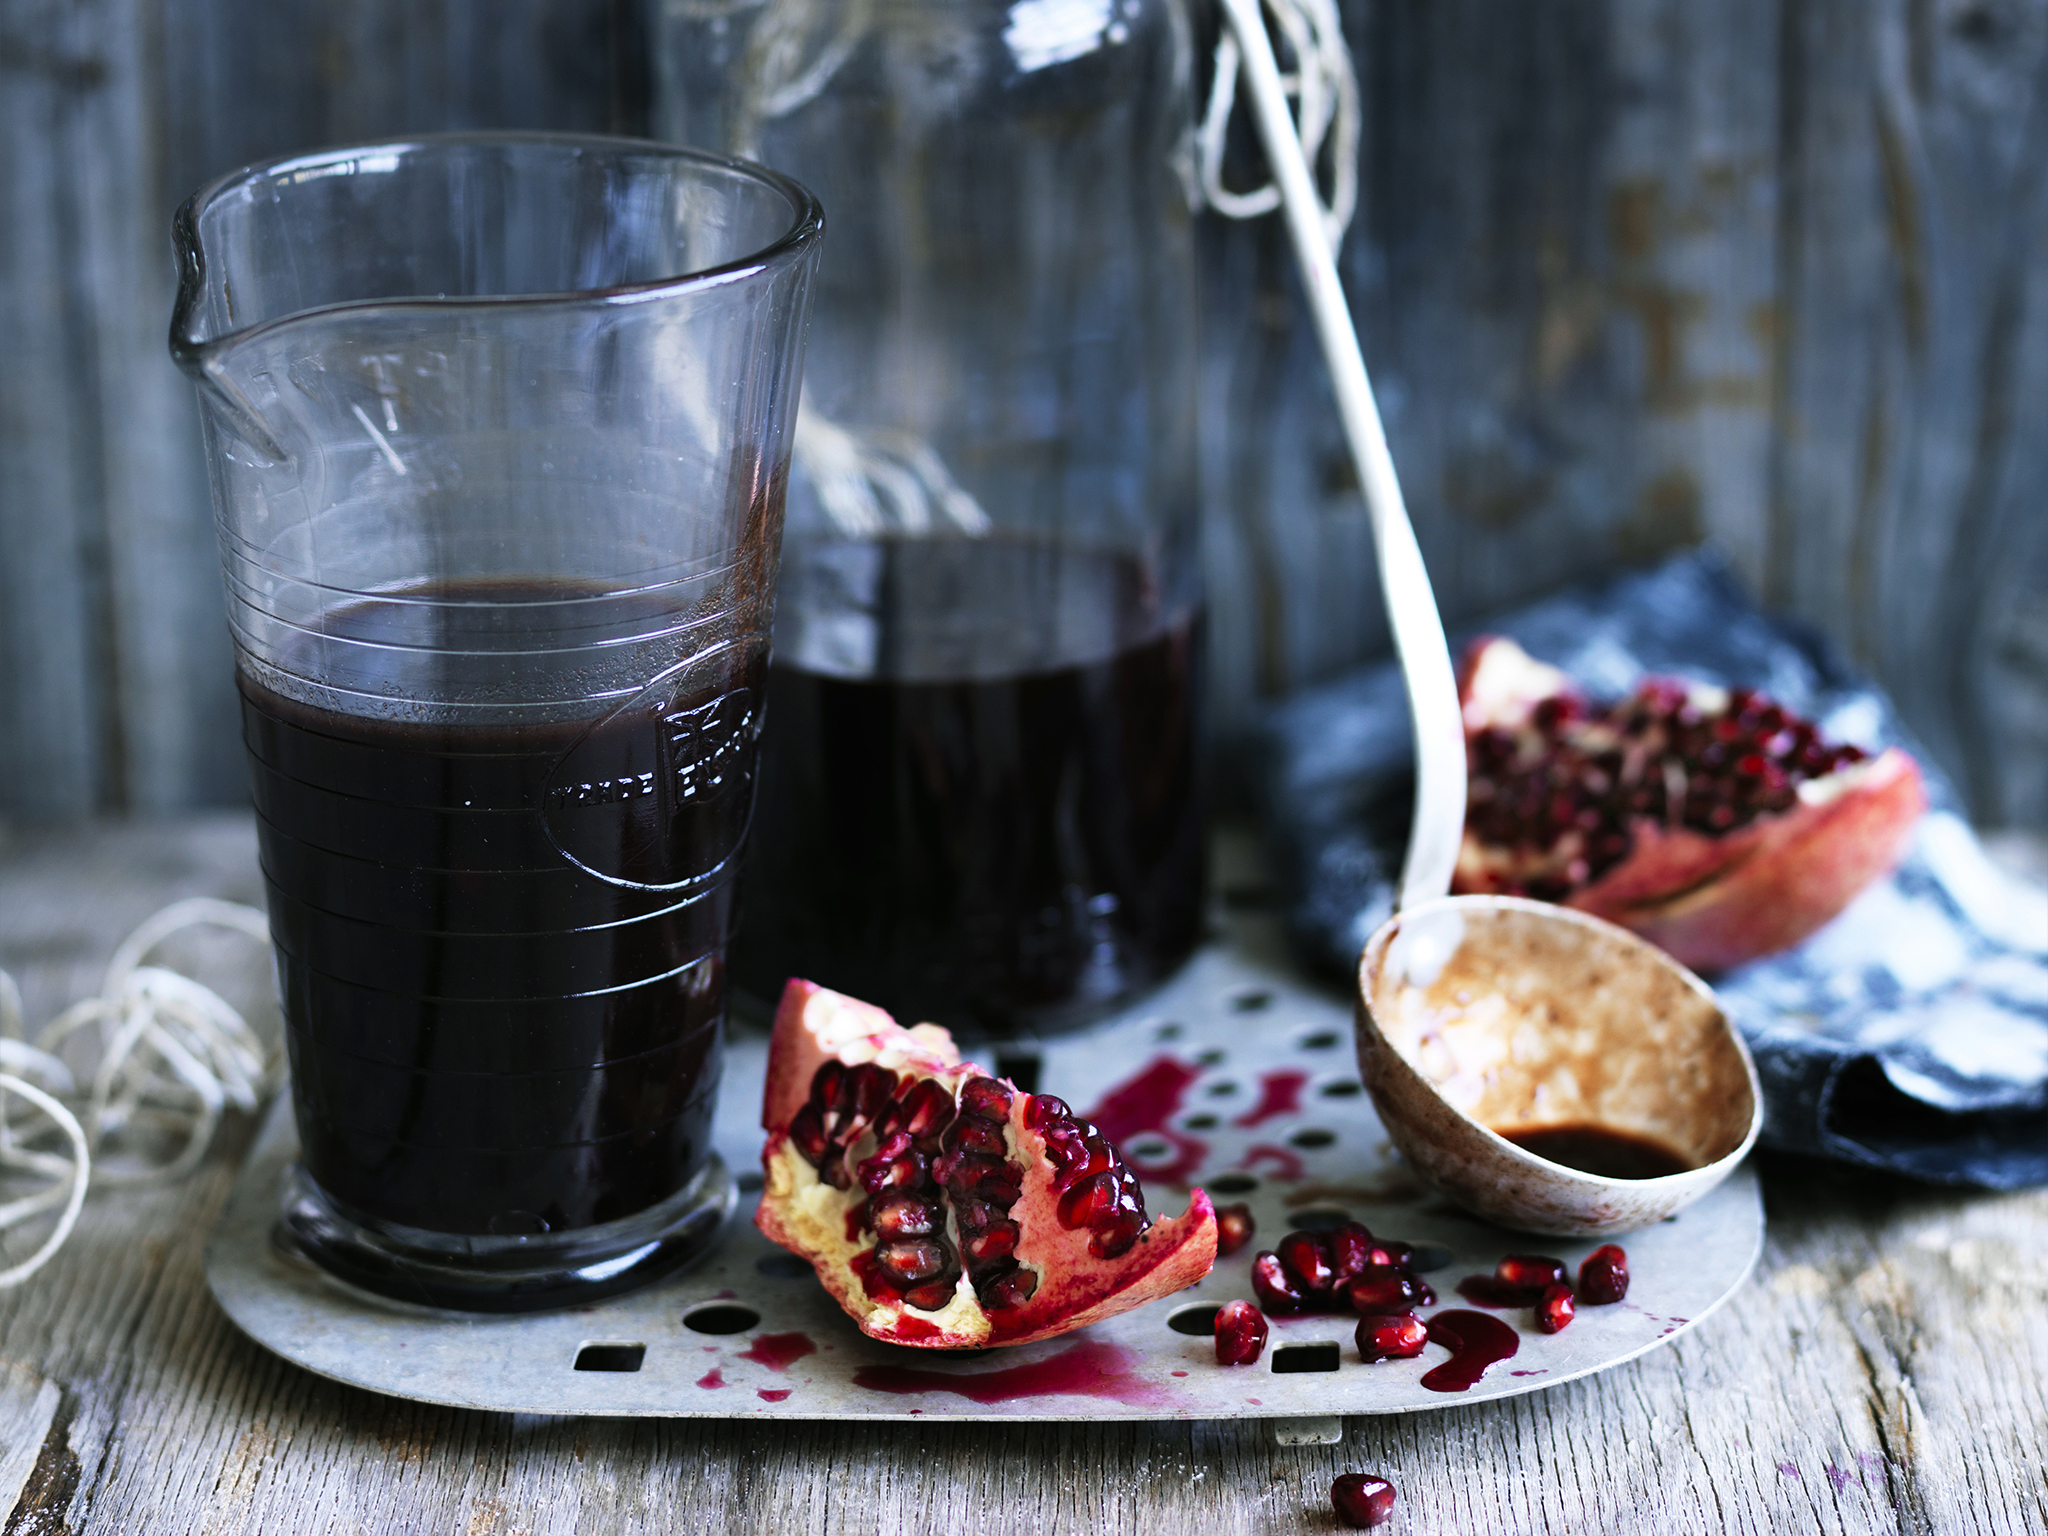 Date and rose pomegranate molasses